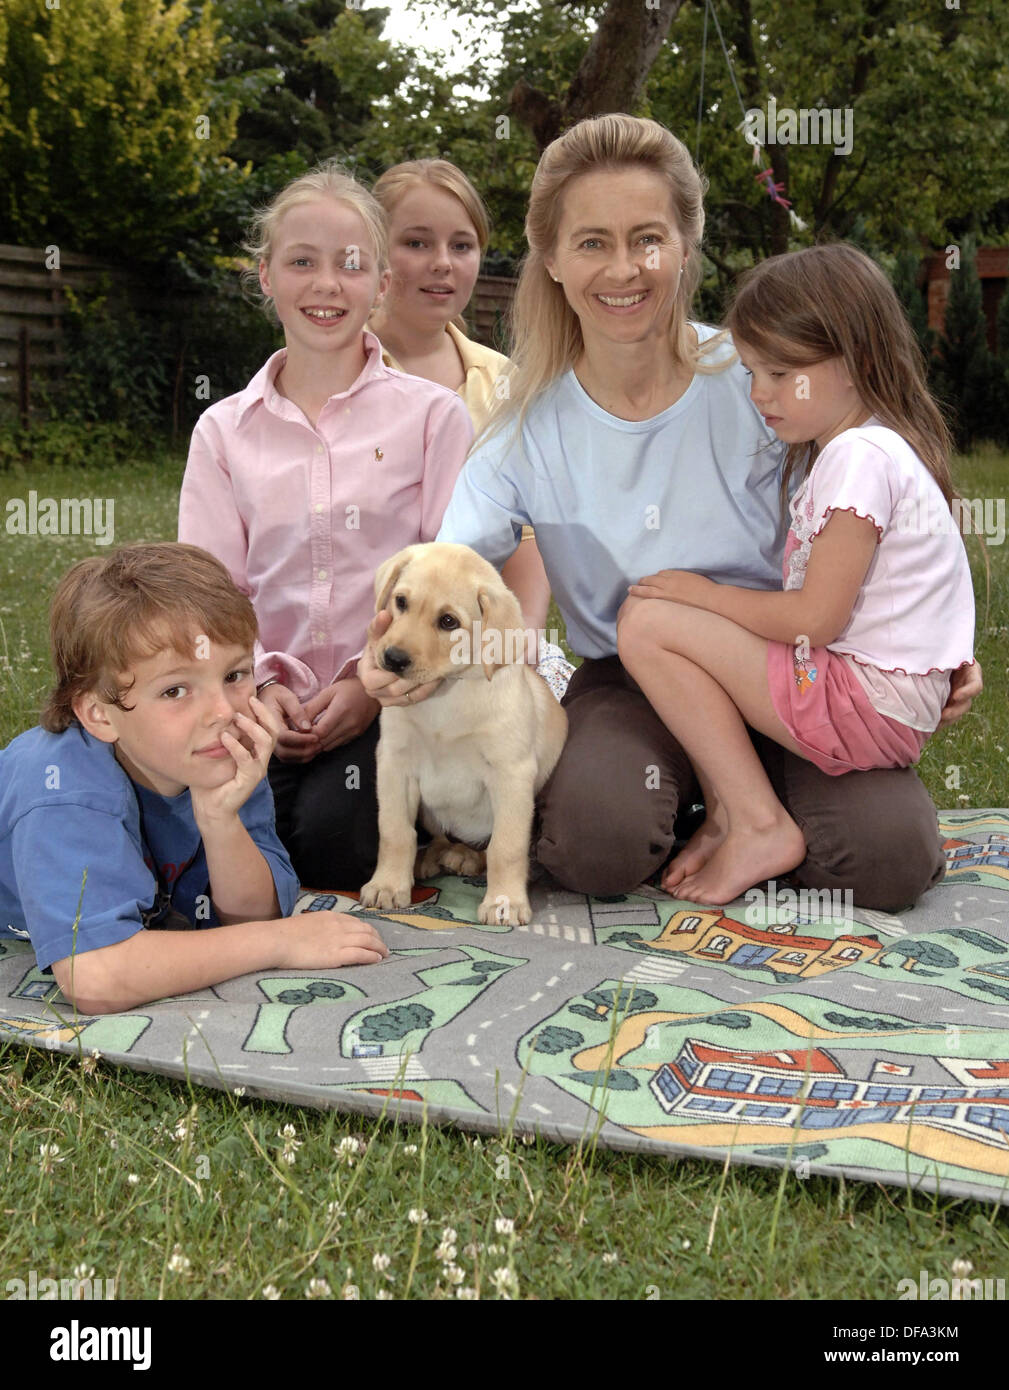 Minister of family affairs of Lower Saxony Ursula von der Leyen with her children (l-r) Egmont, Victoria, Donata and Gracia and their dog Milou on the 5th of July in 2005. Stock Photo